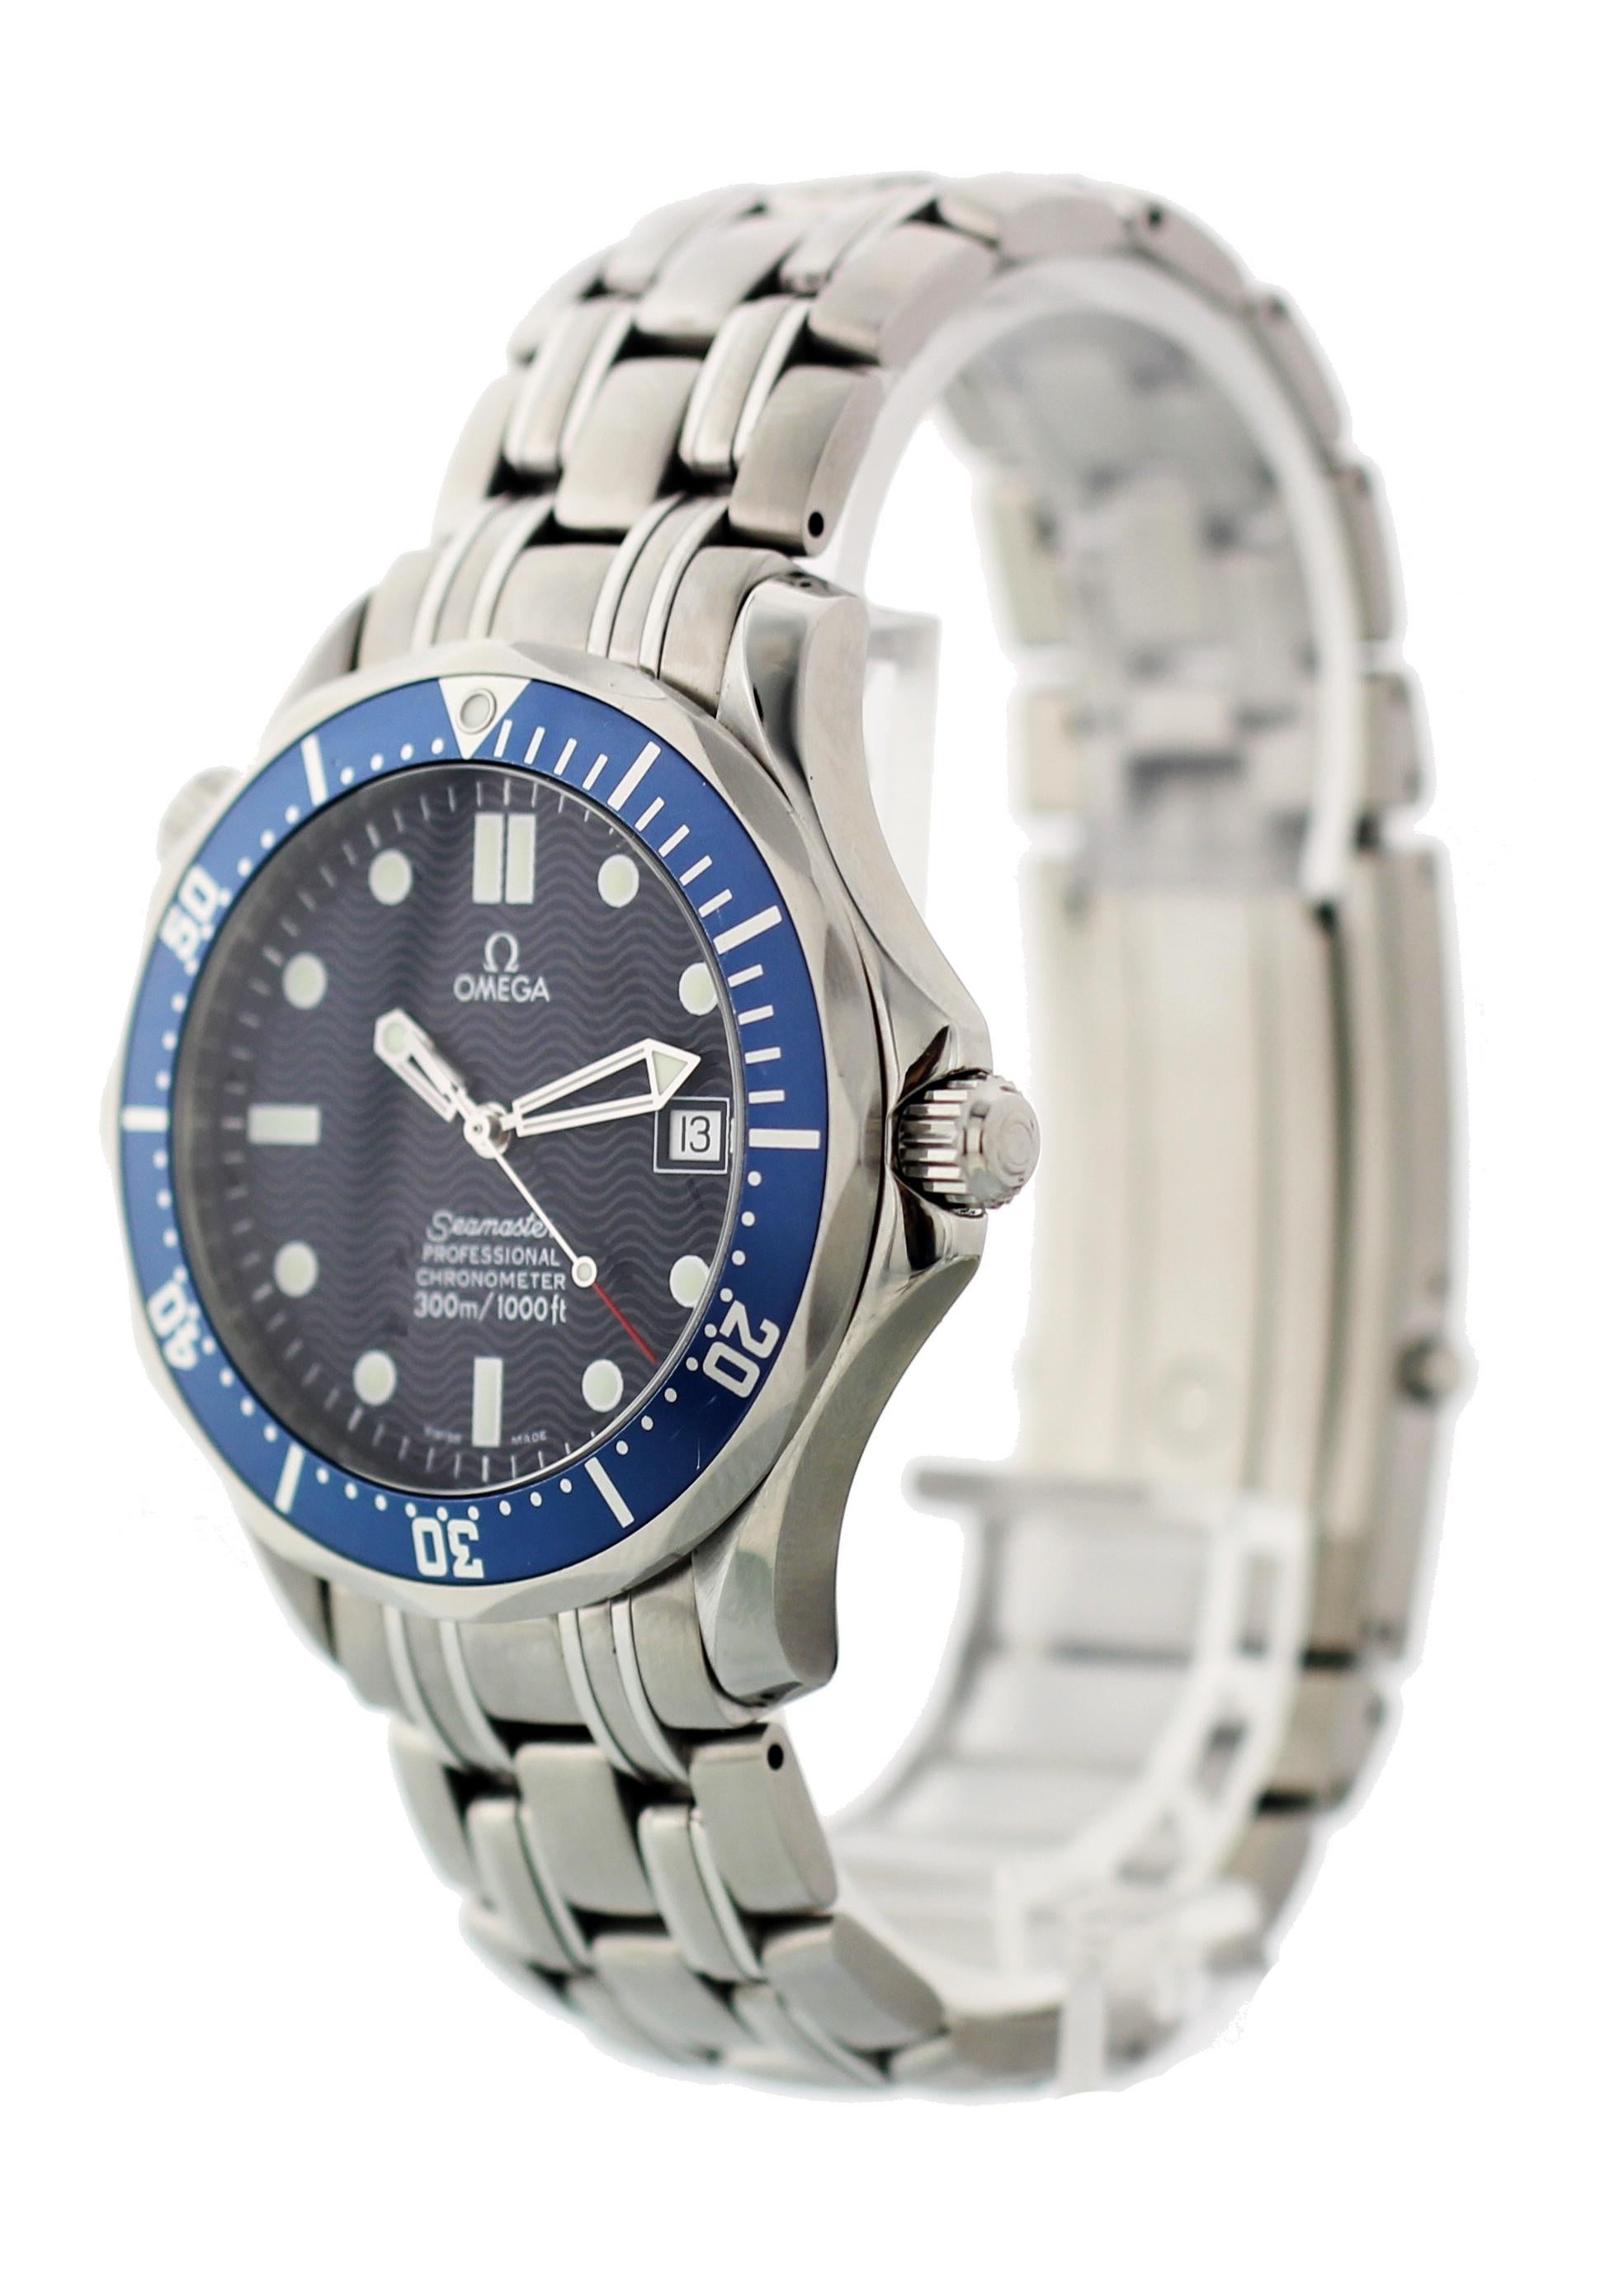 Omega Seamaster Professional Chronometer 2531.80 Mens Watch. 41mm stainless steel case. Unidirectional steel bezel with a blue 60 minute insert  Blue dial with luminous hands and indexes. Date display at the 3 O'clock position. Stainless steel